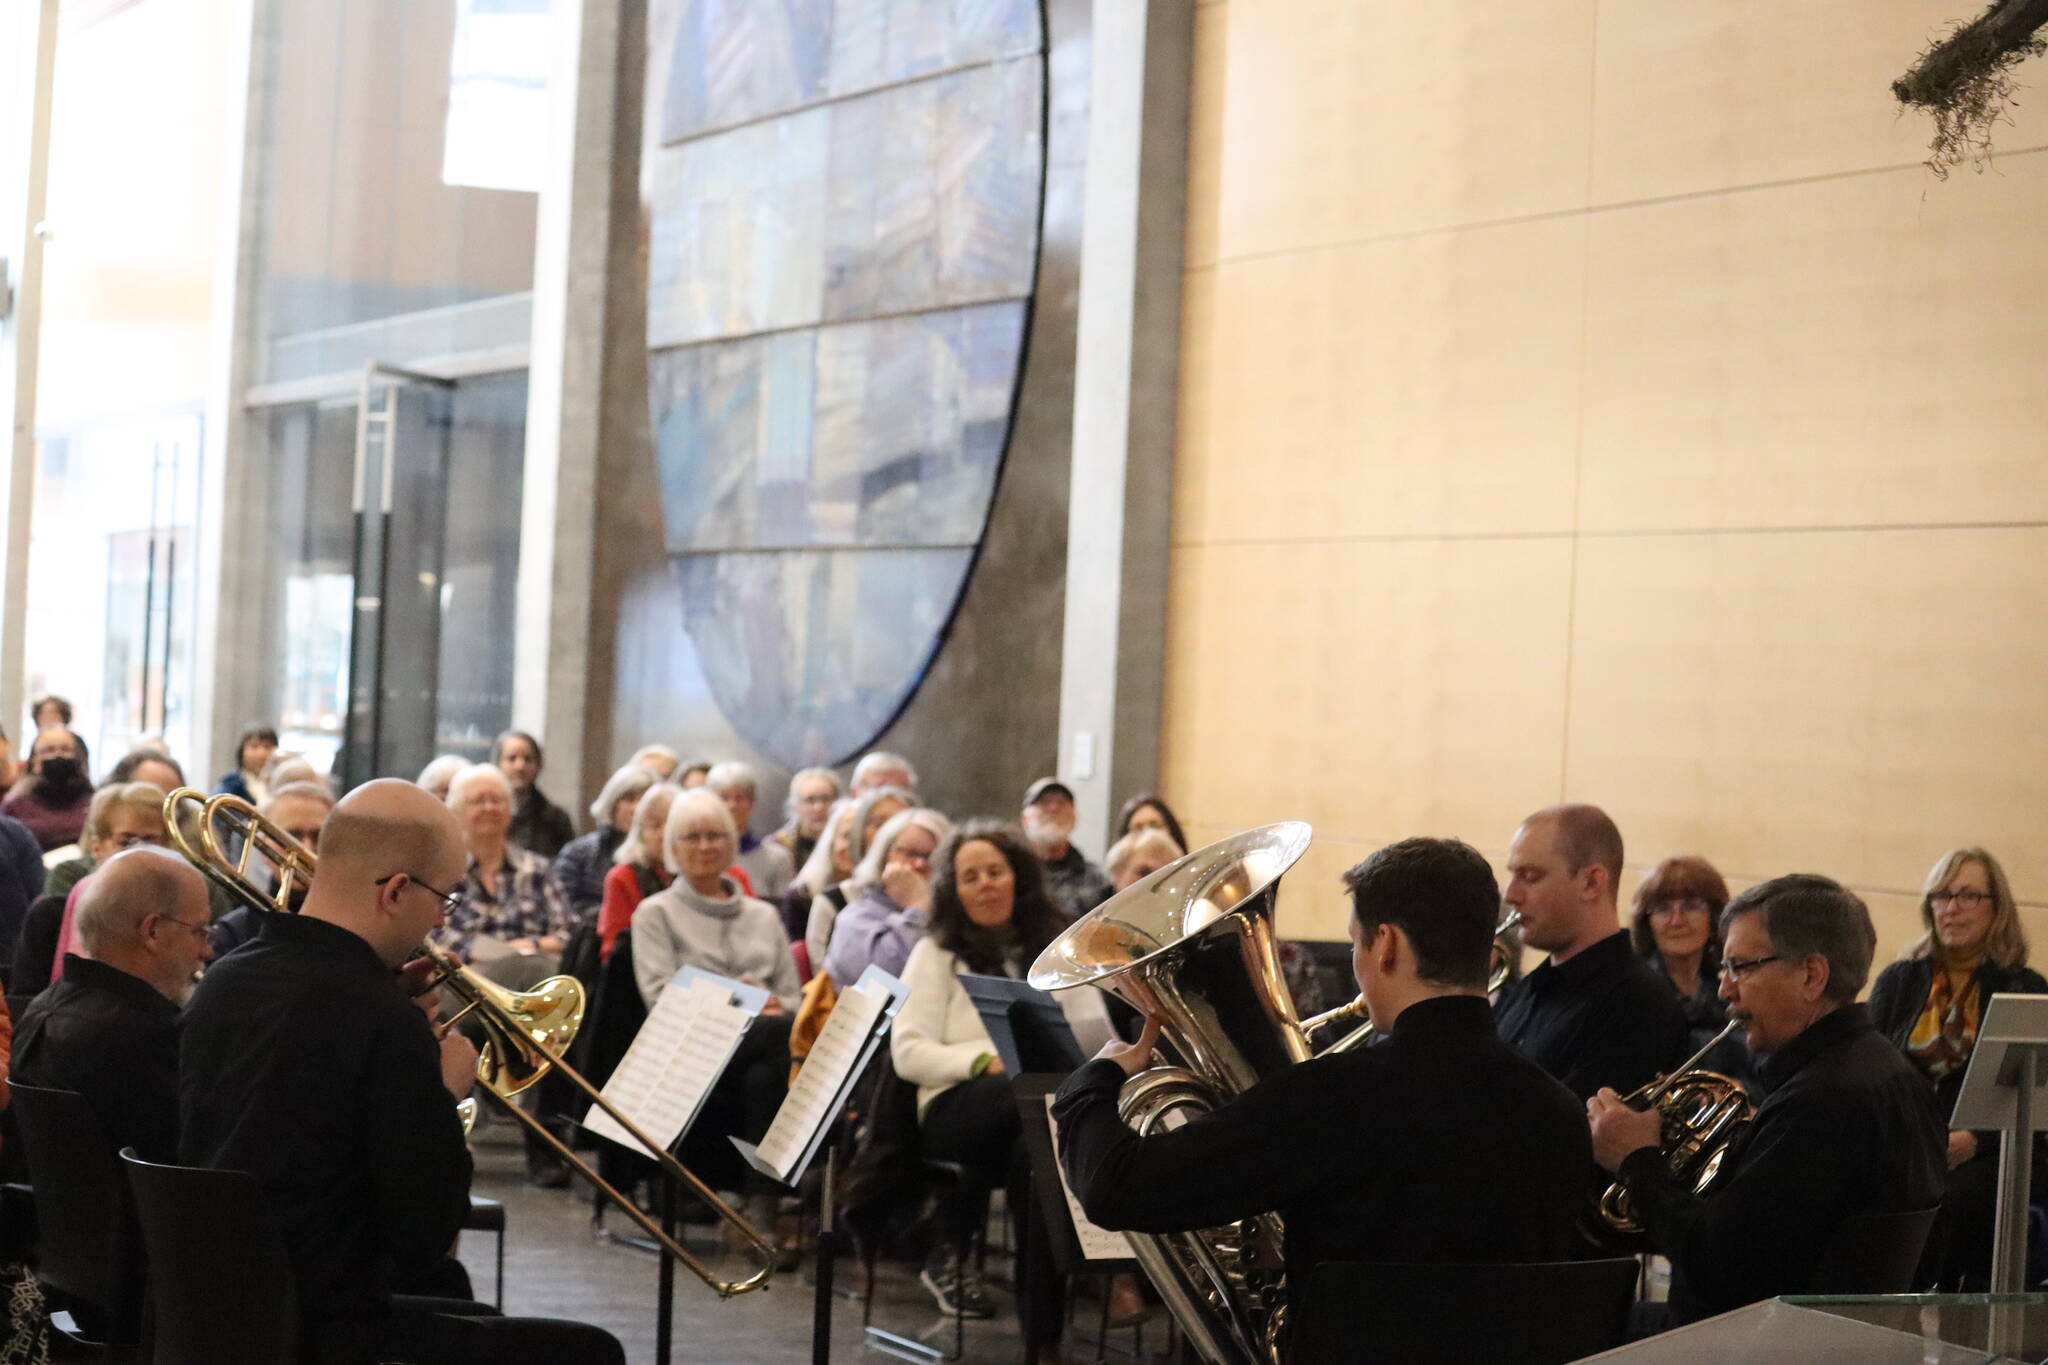 Juneau Brass Quintet performs for a sold out crowd on Saturday at the Alaska State Museum. The concert was sponsored by Friends of the Alaska State Libraries, Archives and Museums. (Jonson Kuhn / Juneau Empire)